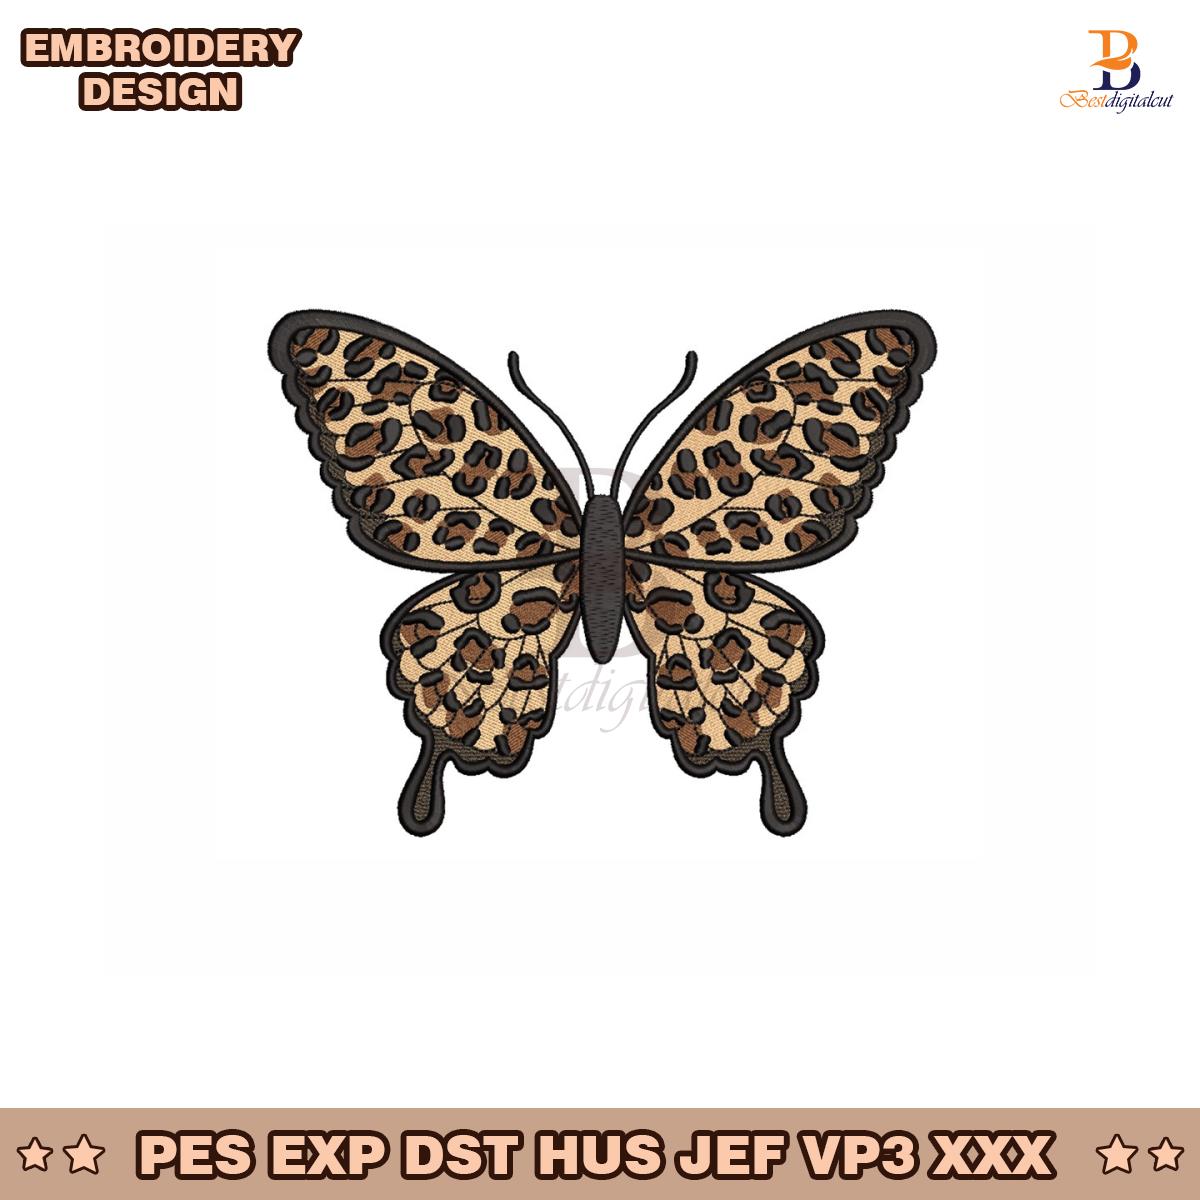 Leopard Butterfly Embroidery Design